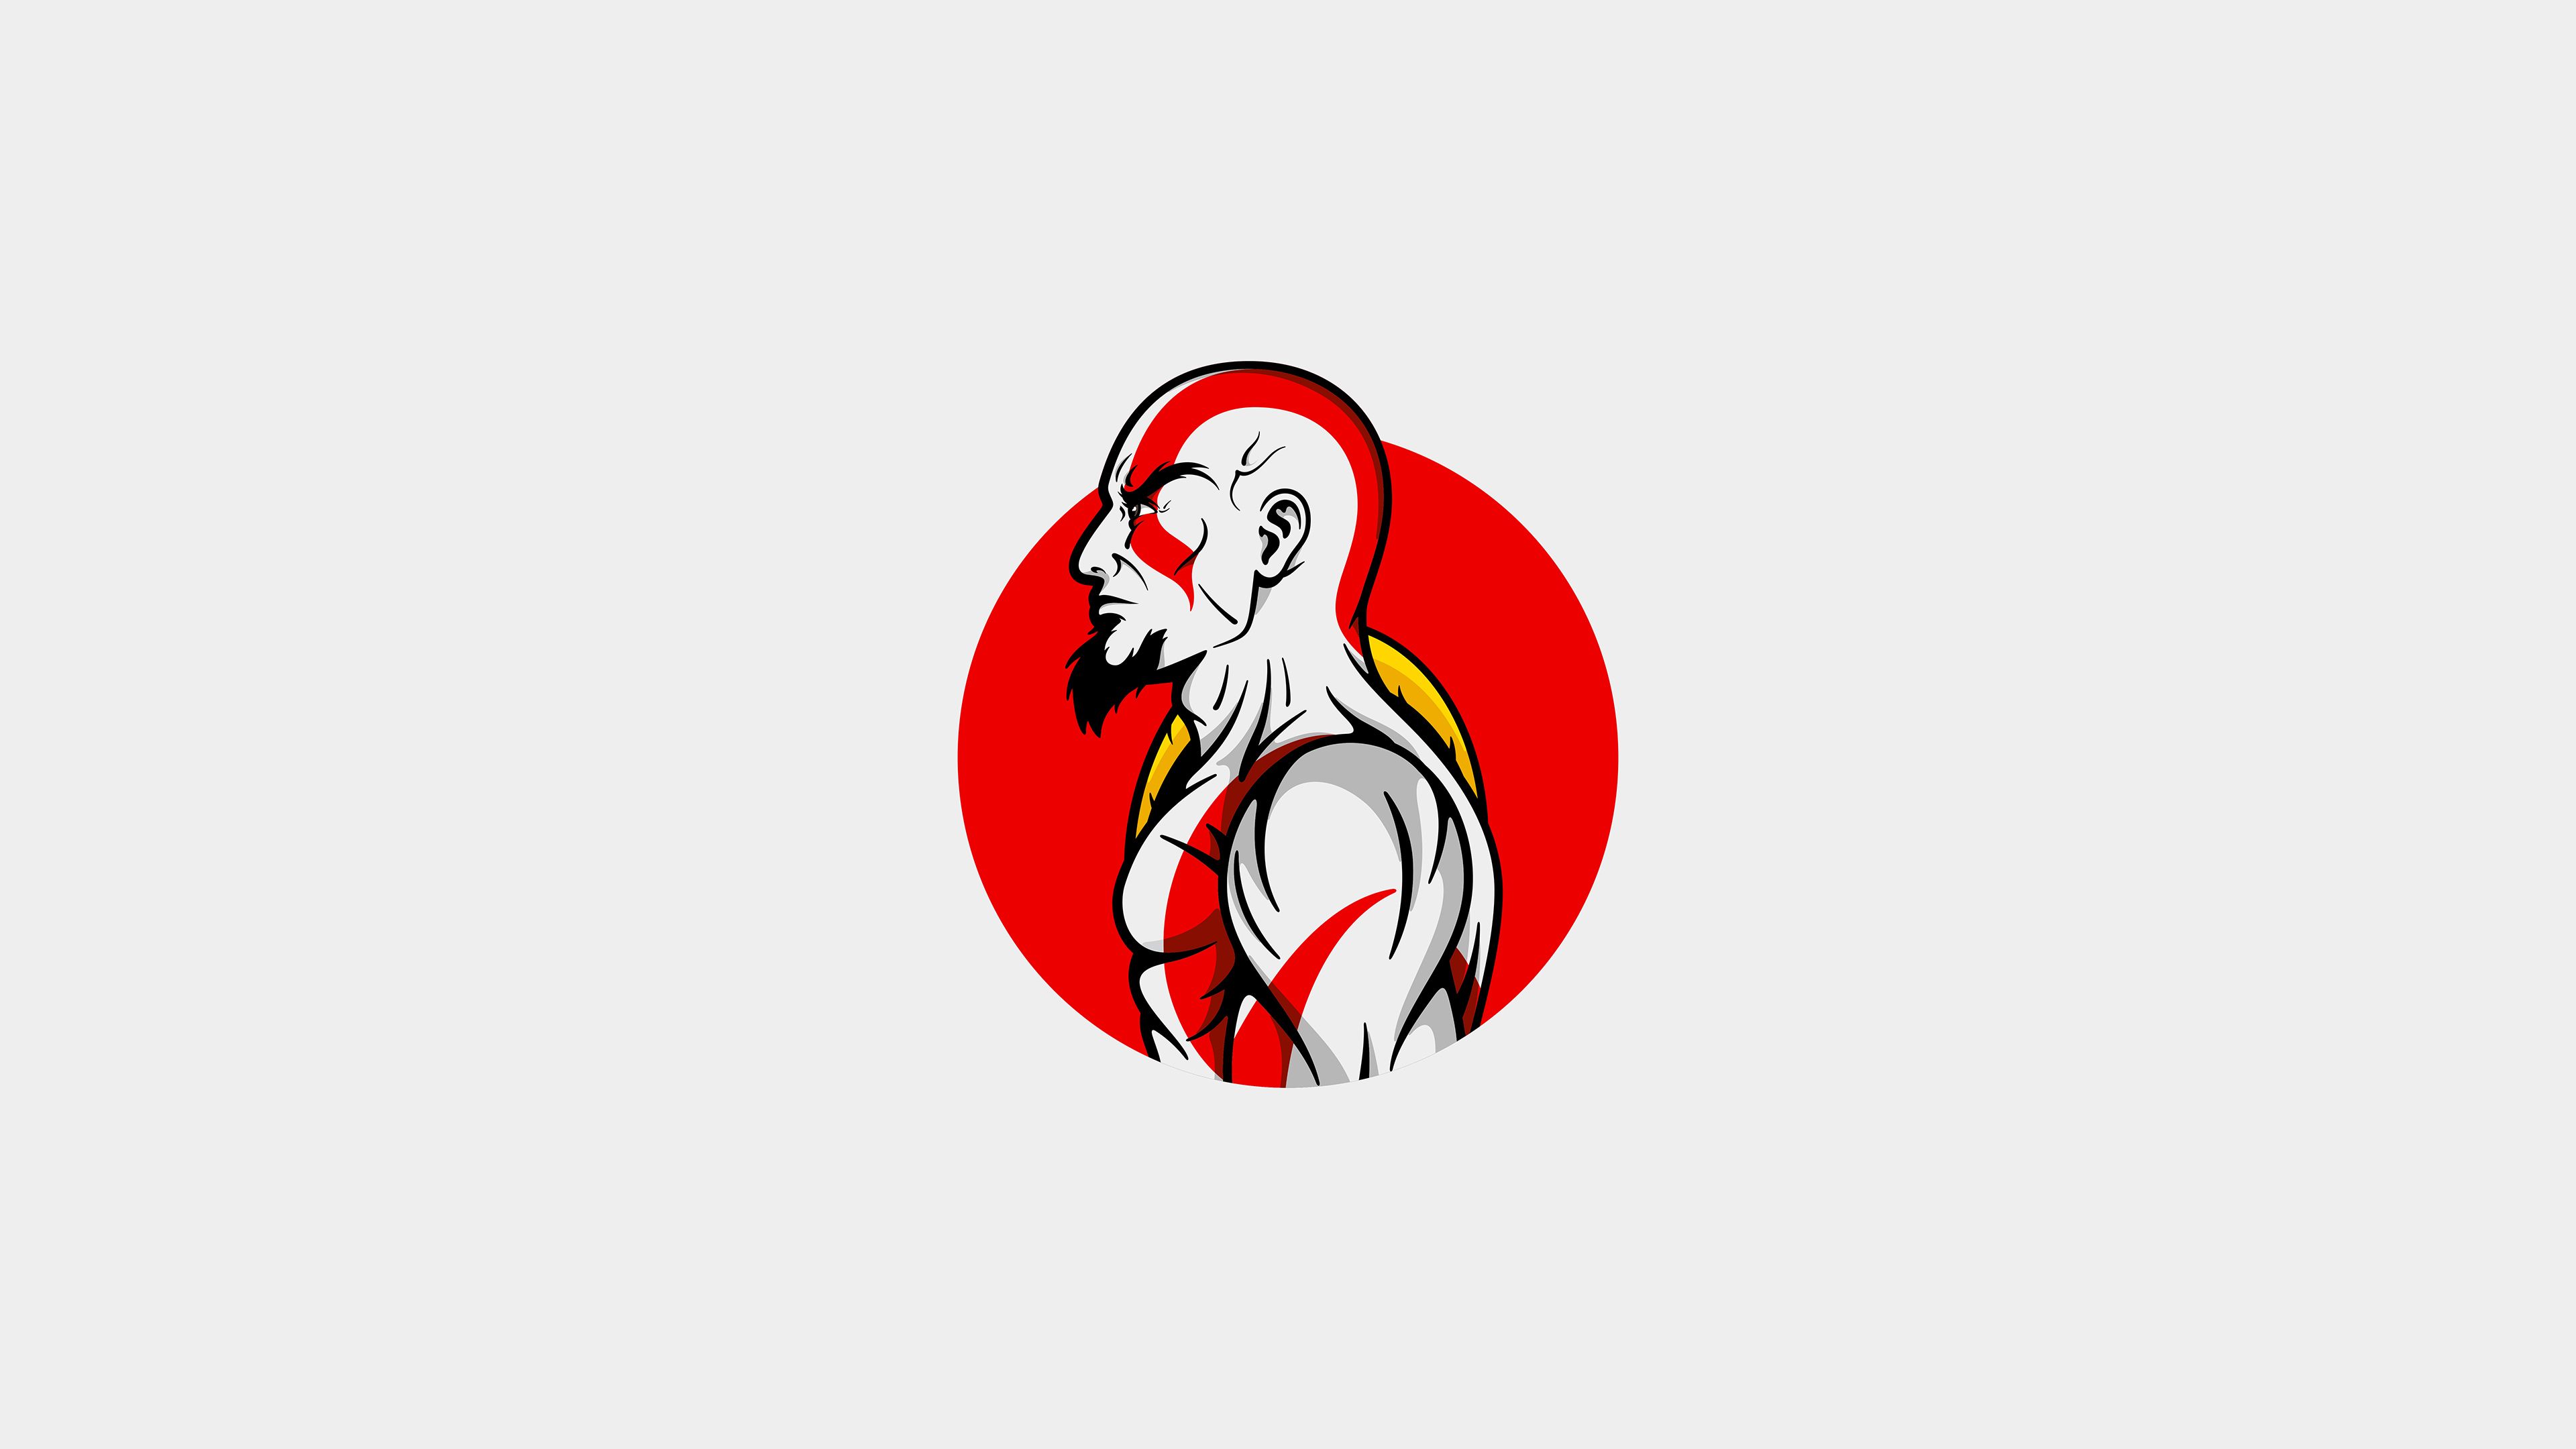 Kratos Minimal Art 4k iPhone iPhone 4S HD 4k Wallpaper, Image, Background, Photo and Picture